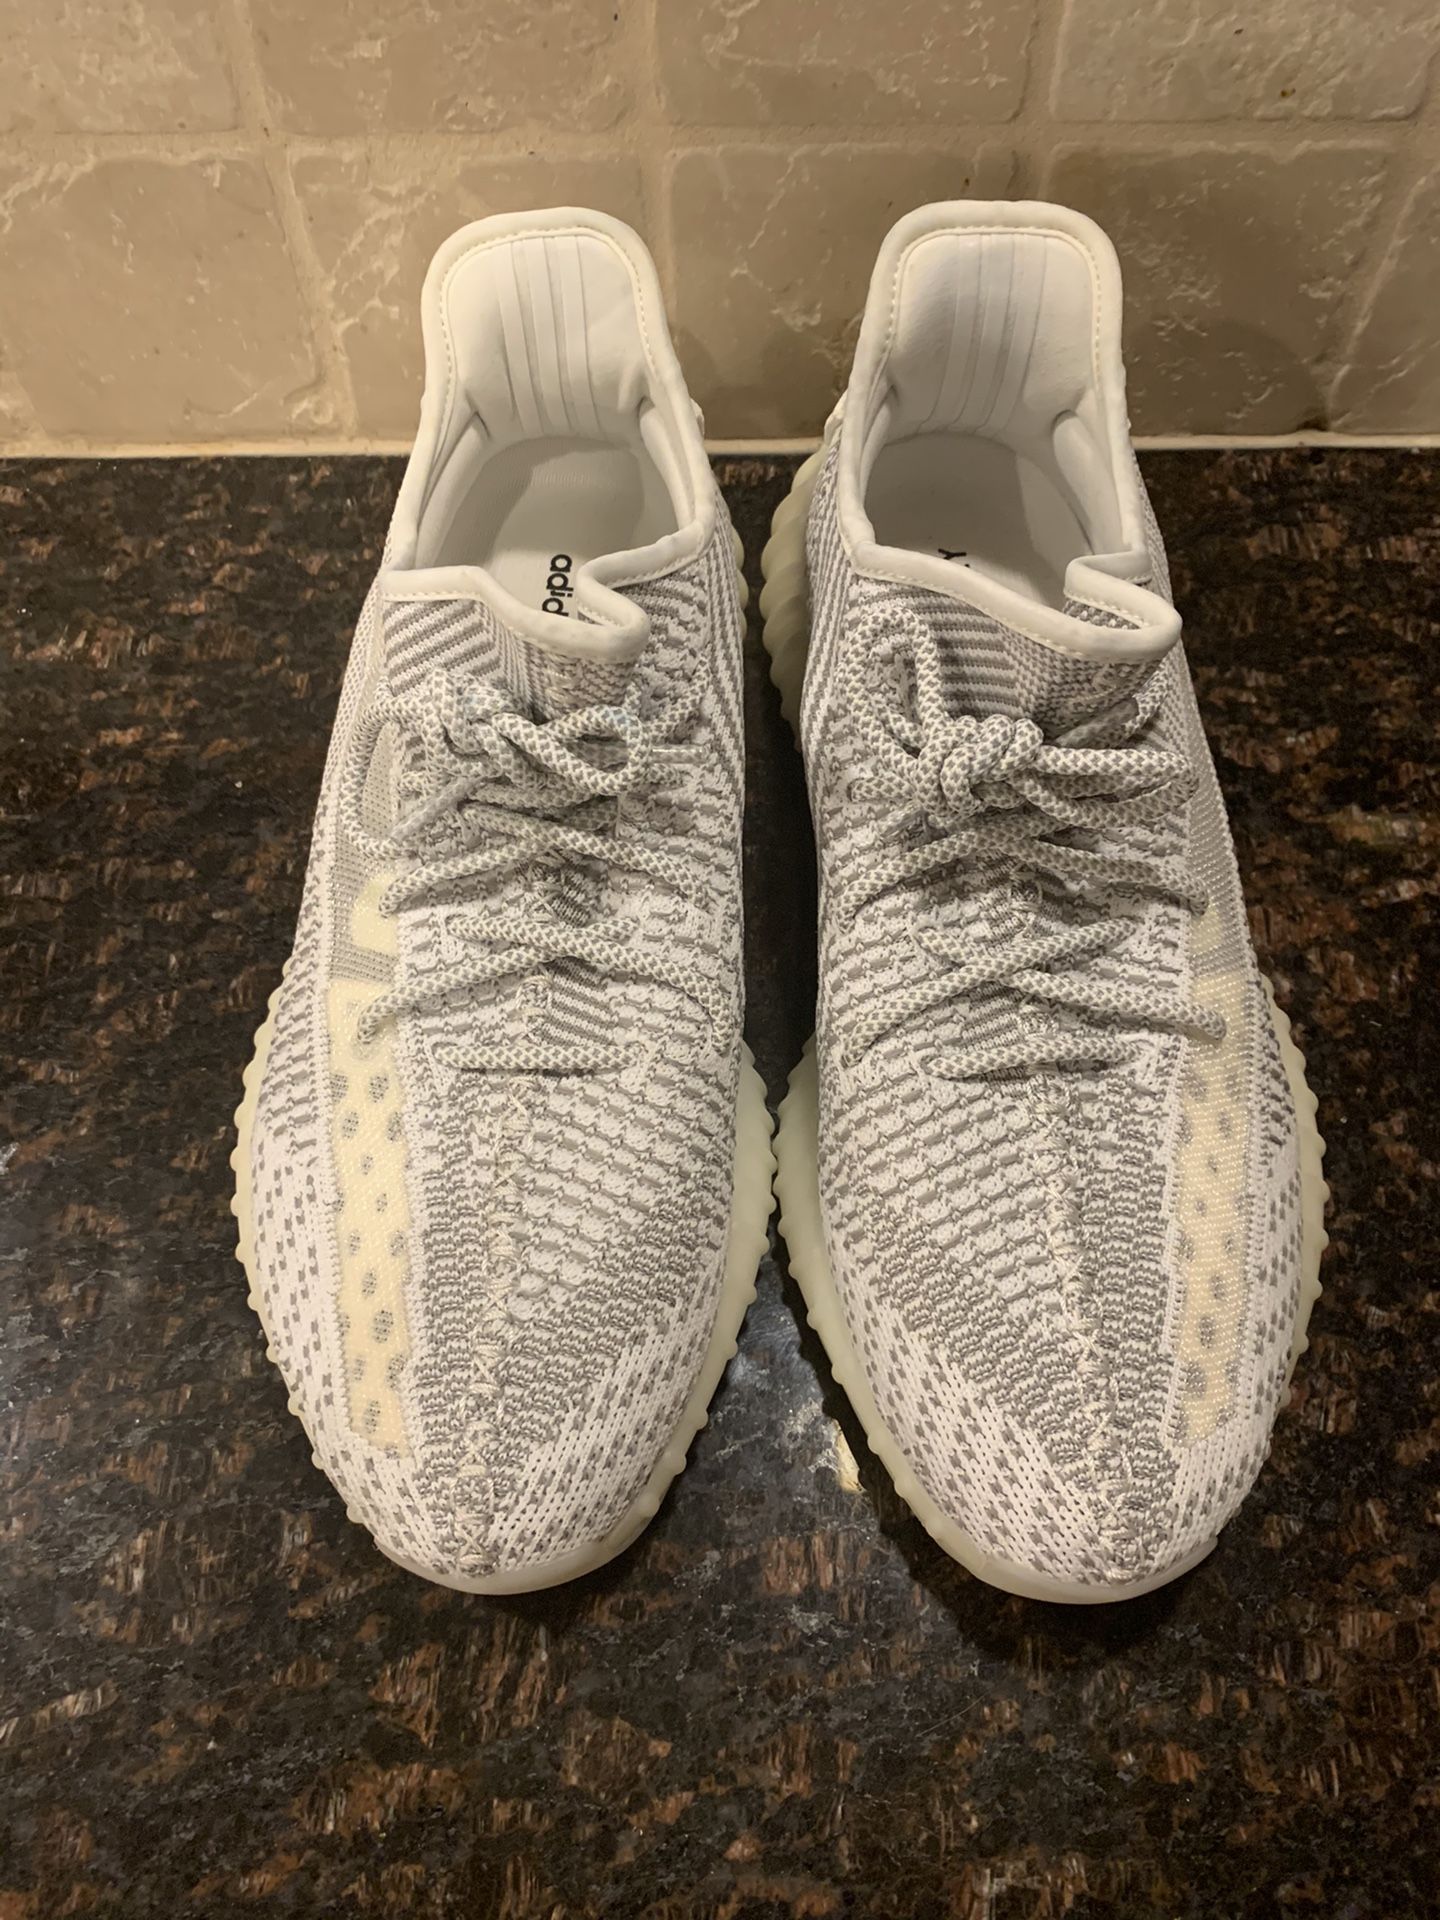 Adidas Yeezy Boost 350 V2 Static Non Reflective EF2905 Size 11.5 Like New